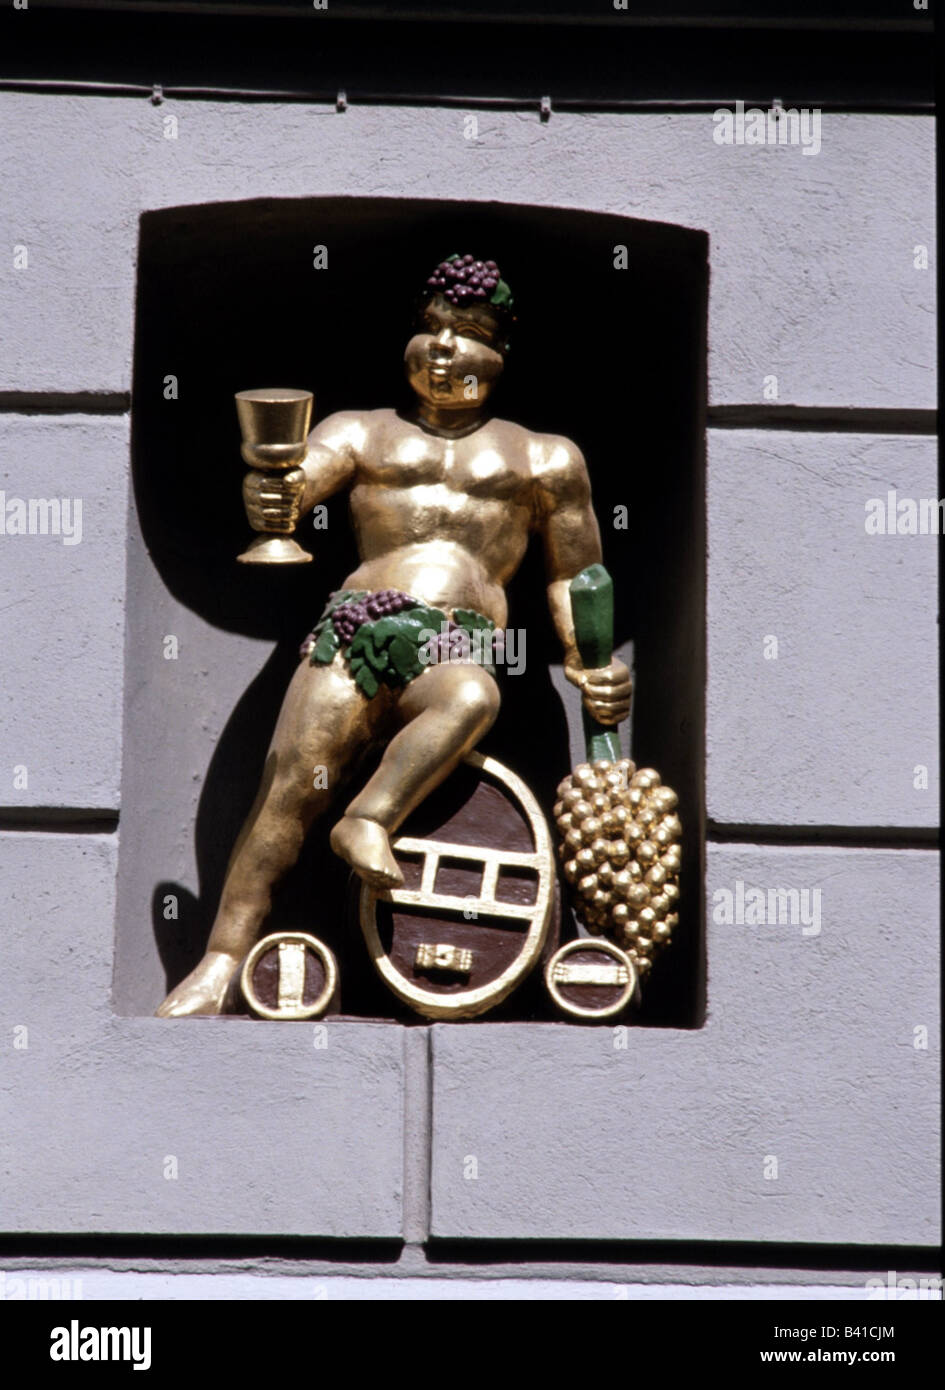 Bacchus, Greek god of wine and fertility, figure at community centre, Wismar, Stock Photo